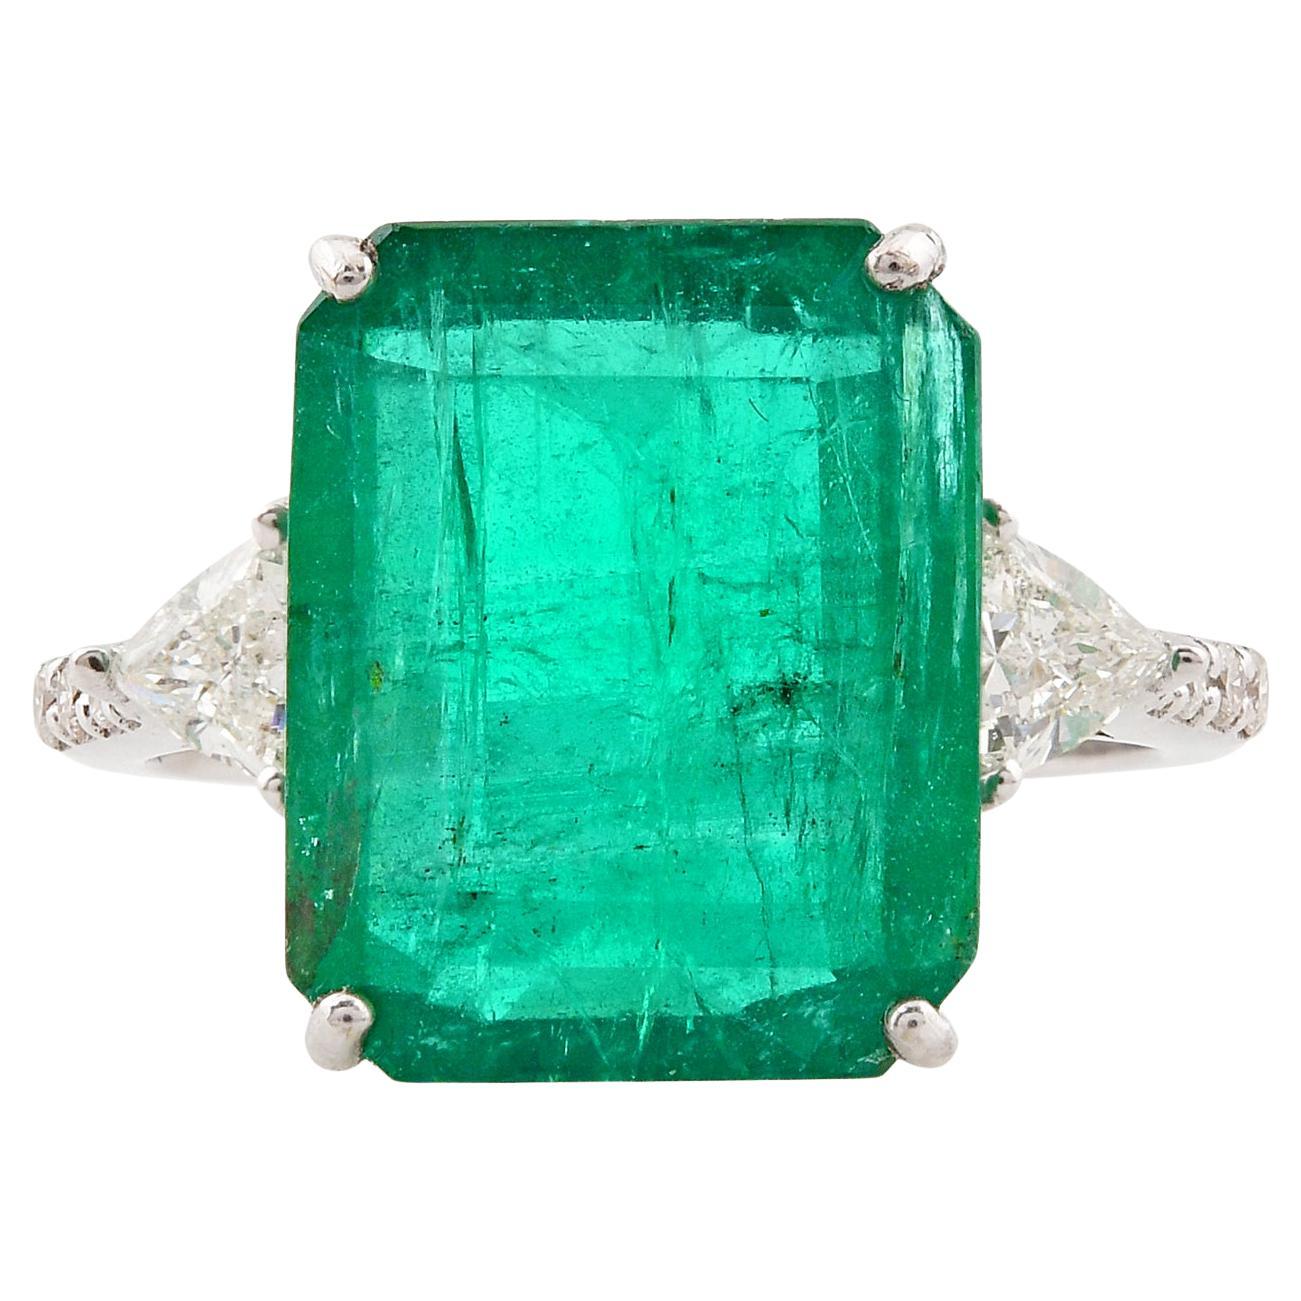 For Sale:  Natural Emerald Gemstone Ring Trillion Cut Diamond Solid 18k White Gold Jewelry